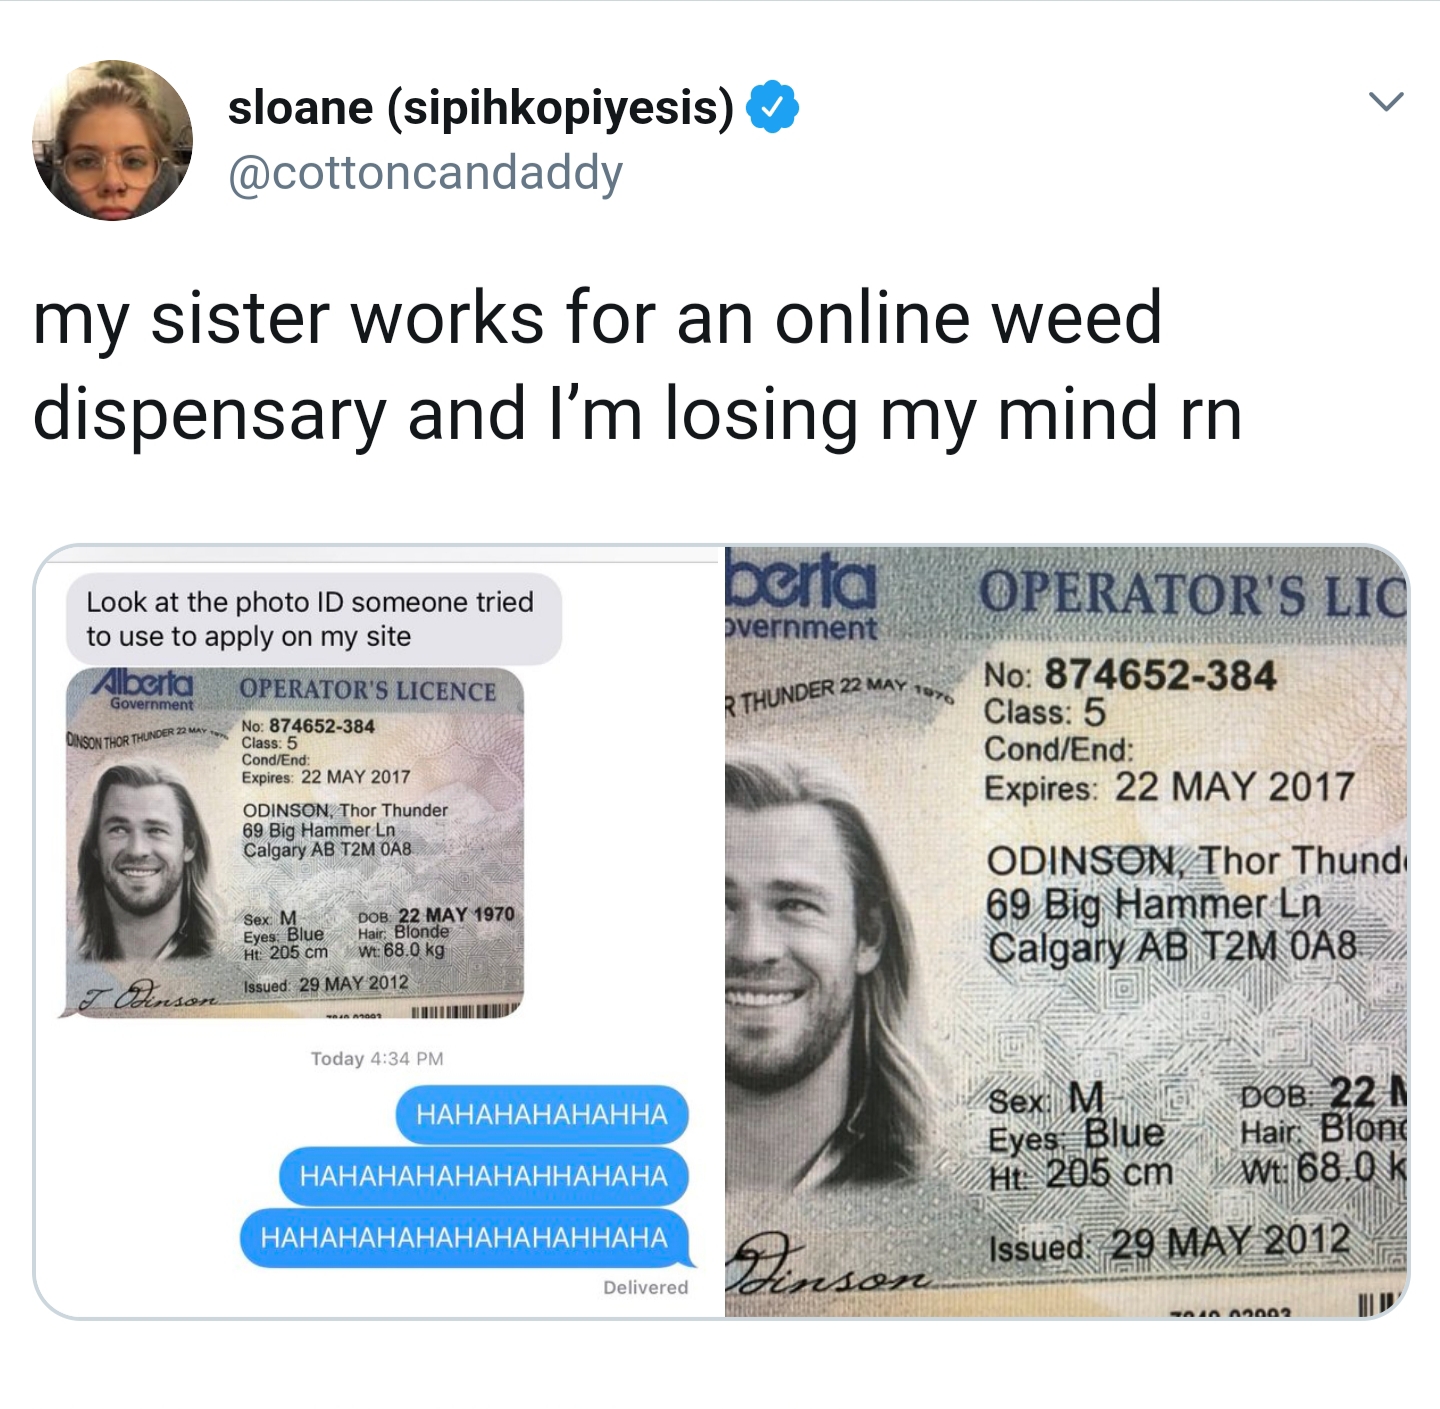 identity document - sloane sipihkopiyesis my sister works for an online weed dispensary and I'm losing my mind rn berta Operator'S Lic svernment Thunder 22 Look at the photo Id someone tried to use to apply on my site Operator'S Licence 874552334 Cast ODI